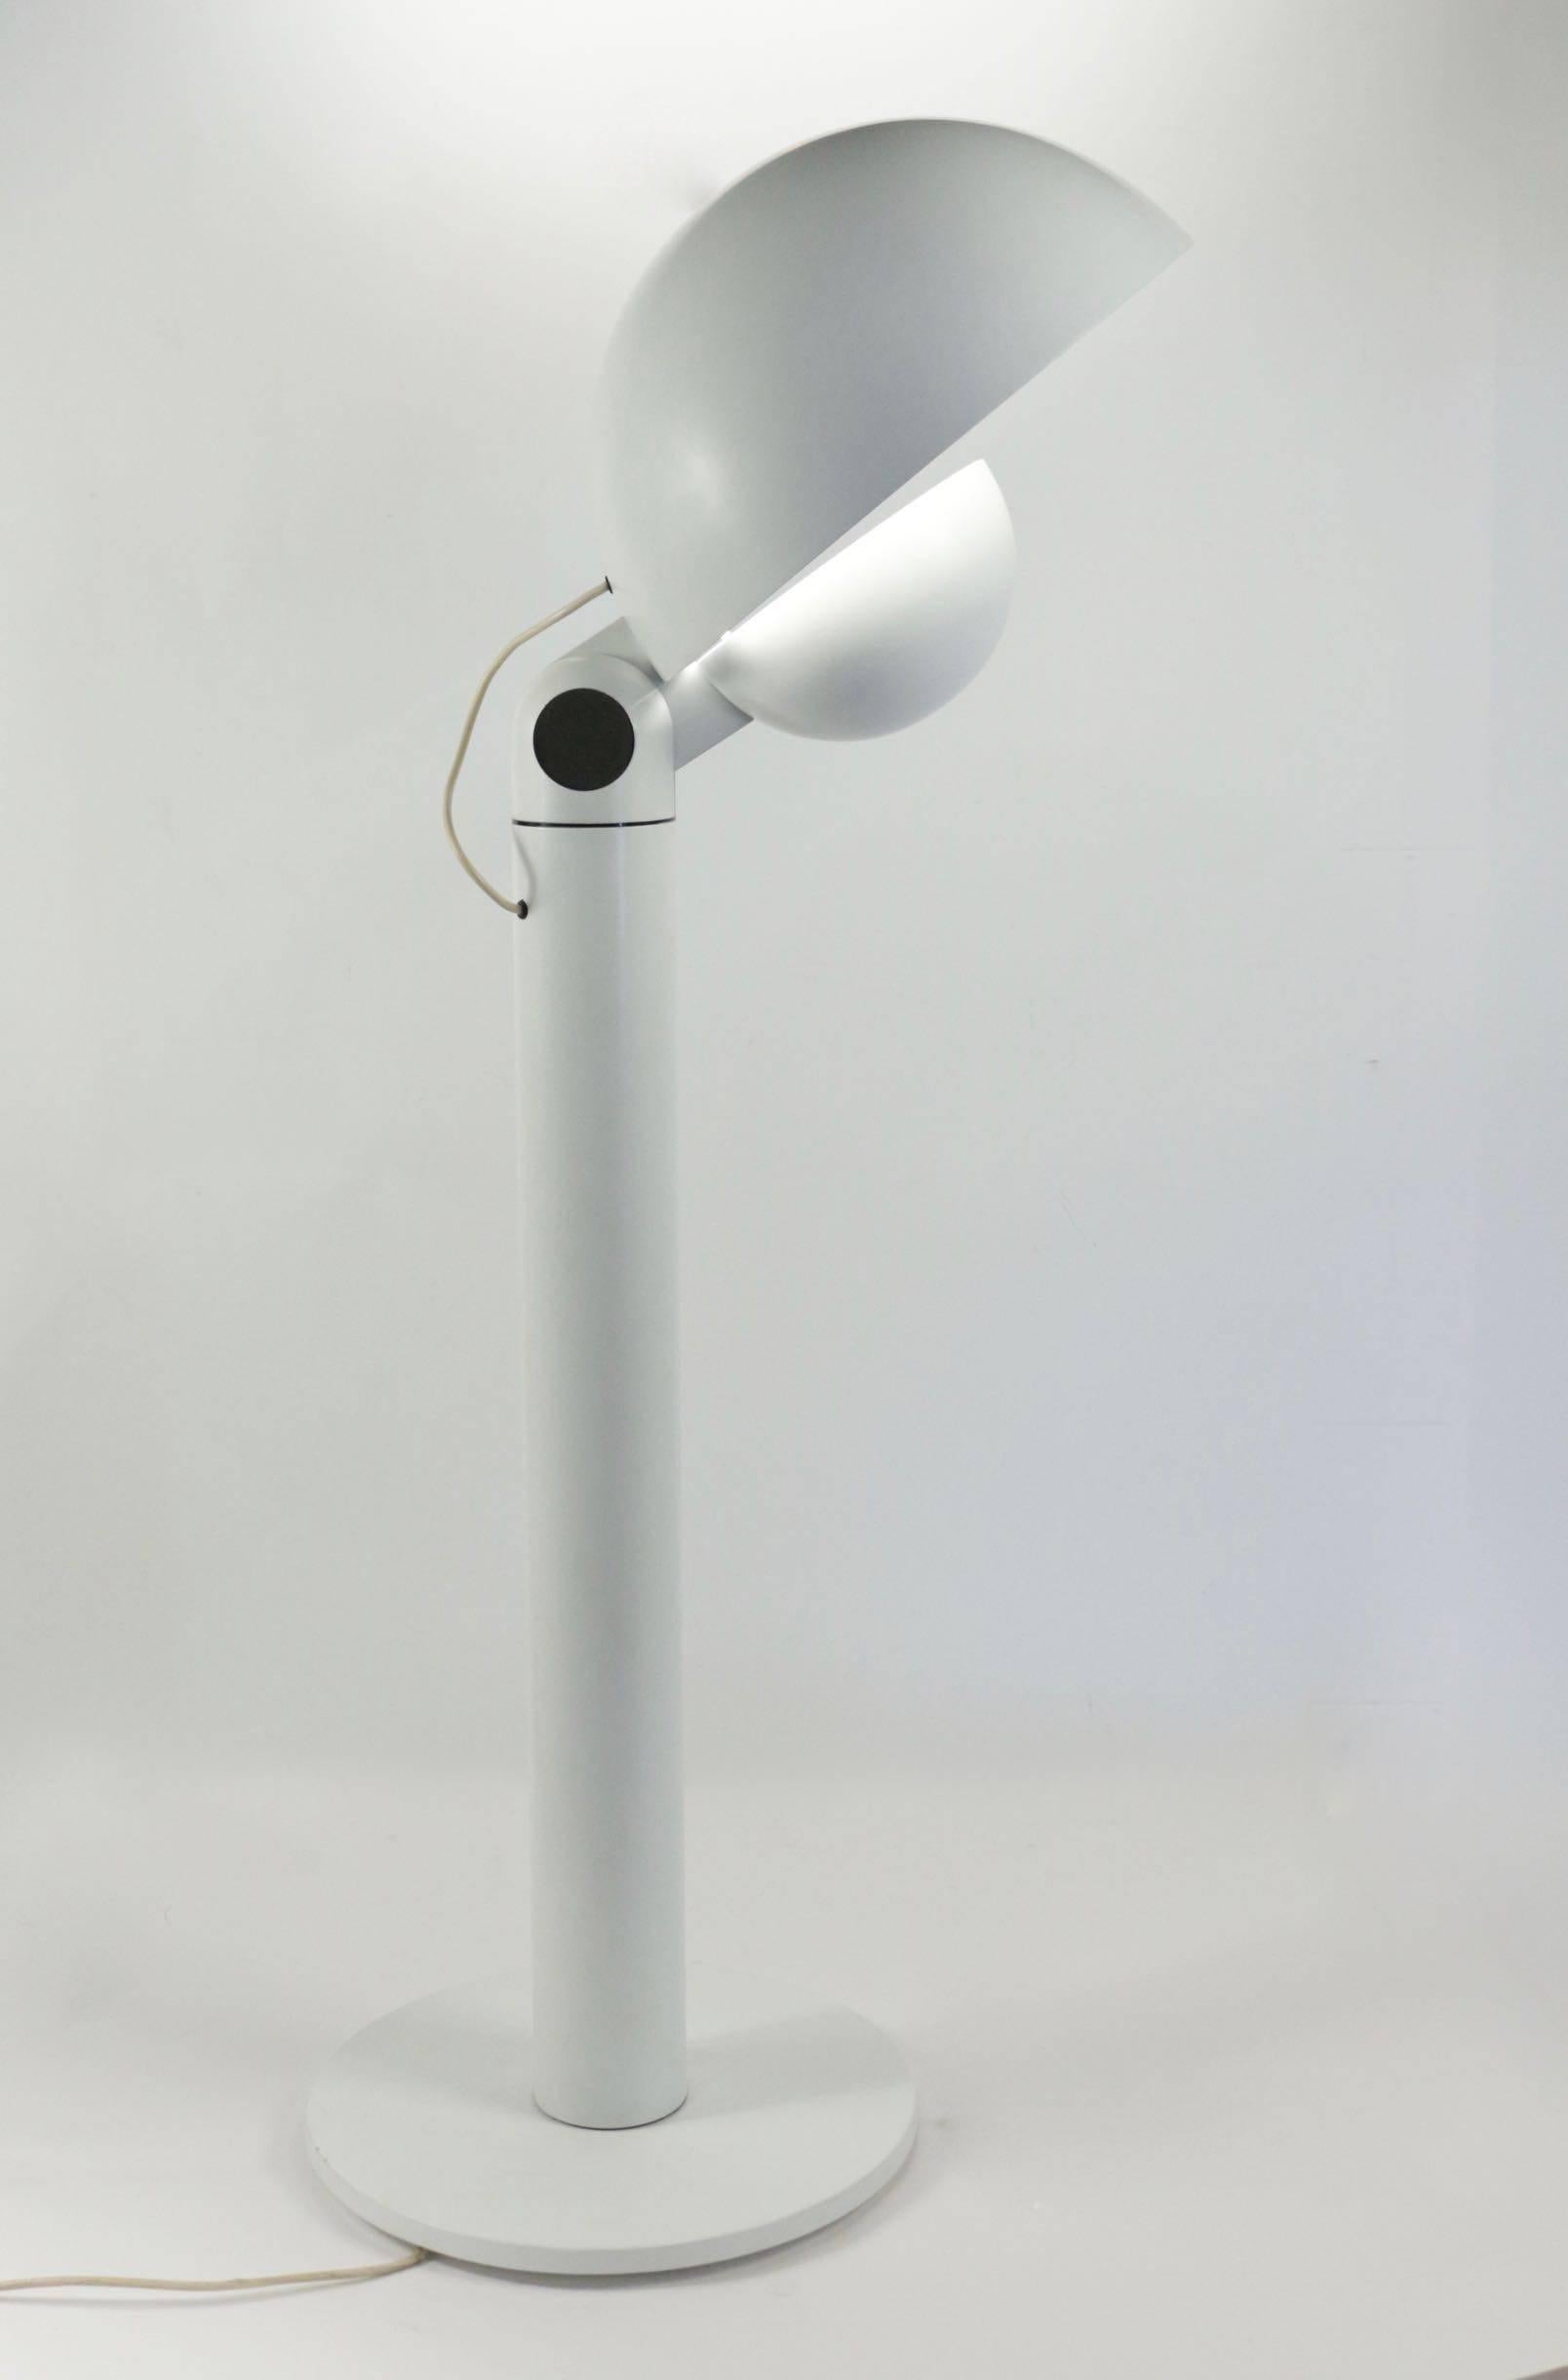 'Cuffia' floor lamp designed by Francesco Buzzi. 
Manufactured by Bieffeplast, Italy, 1969.

Made of white lacquered aluminum.
The two hemispherical lampshades are adjustable with large chrome screws.
 